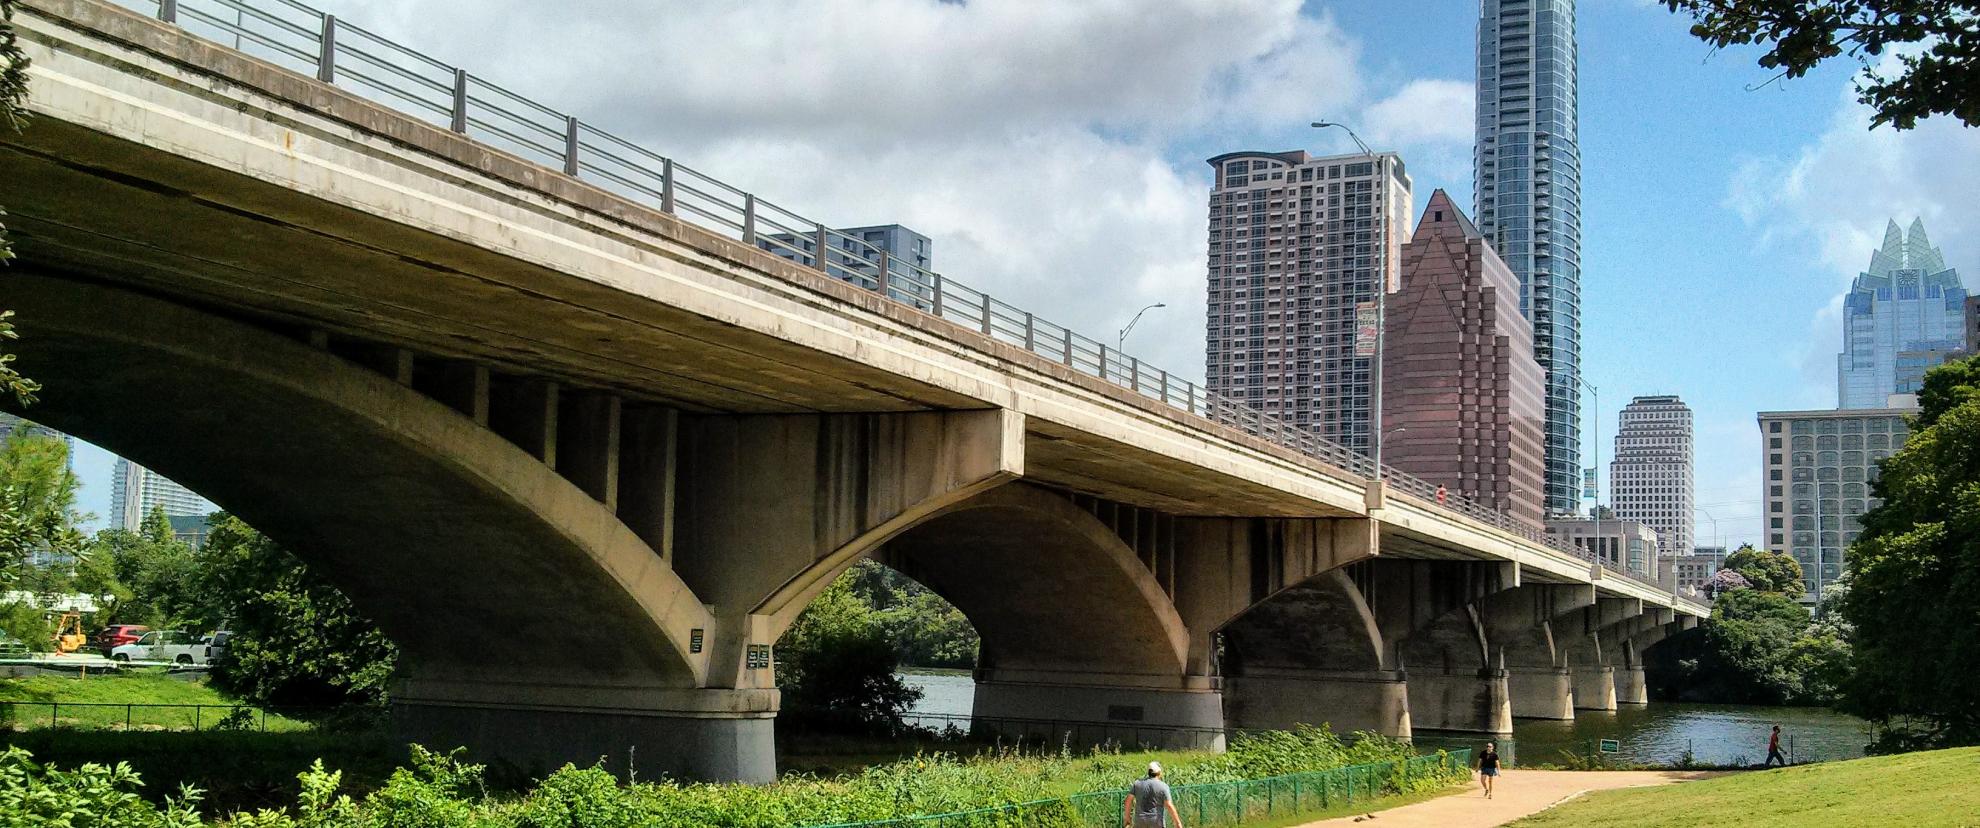 Congress Avenue Bridge in Austin, Texas. There is a large bat colony in there!